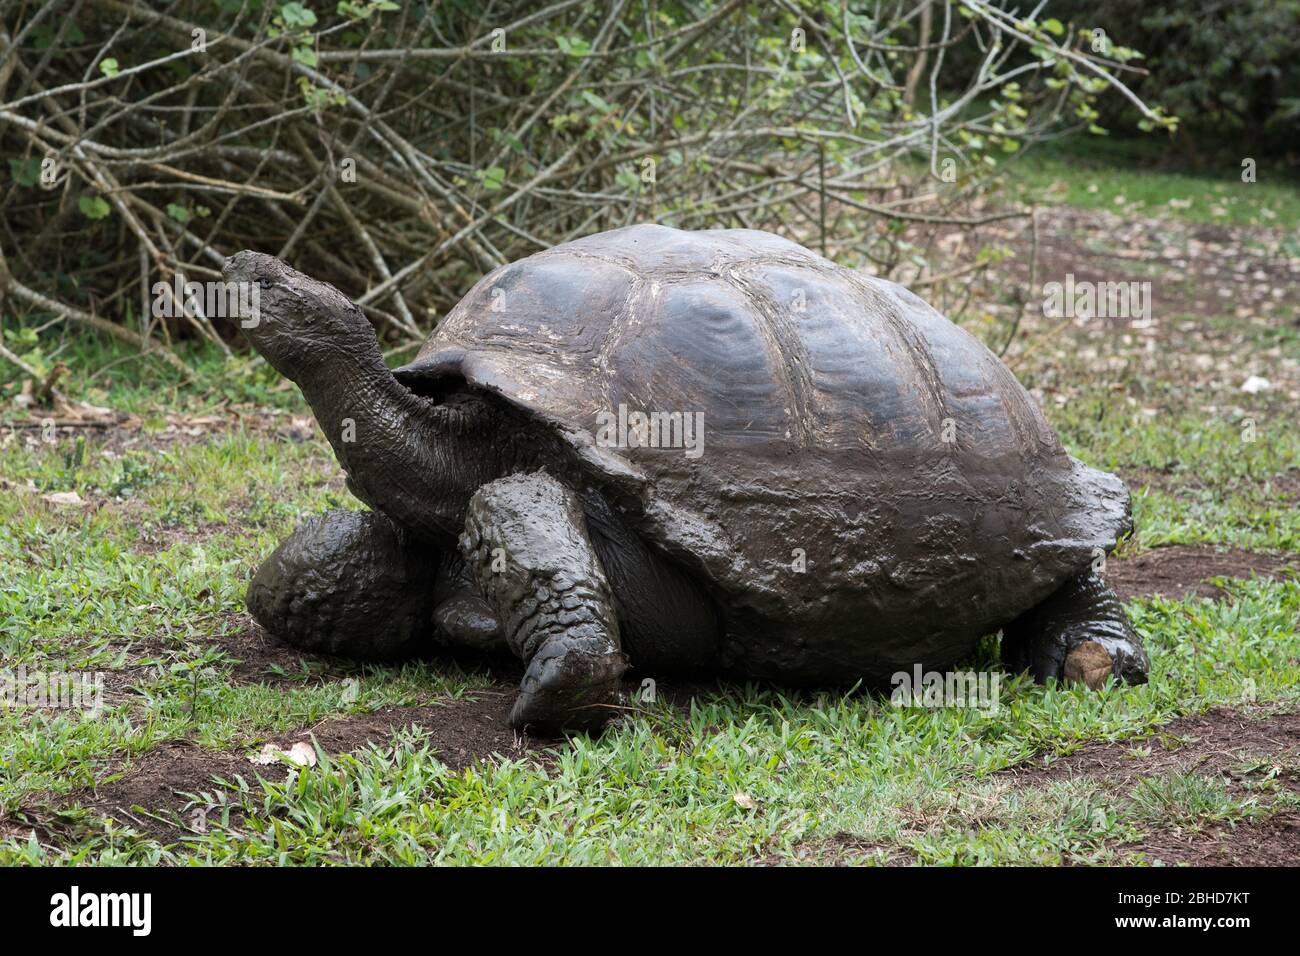 Galápagos tortoise in the El Chato Reserve on Santa Cruz at the Galapagos Islands. Stock Photo